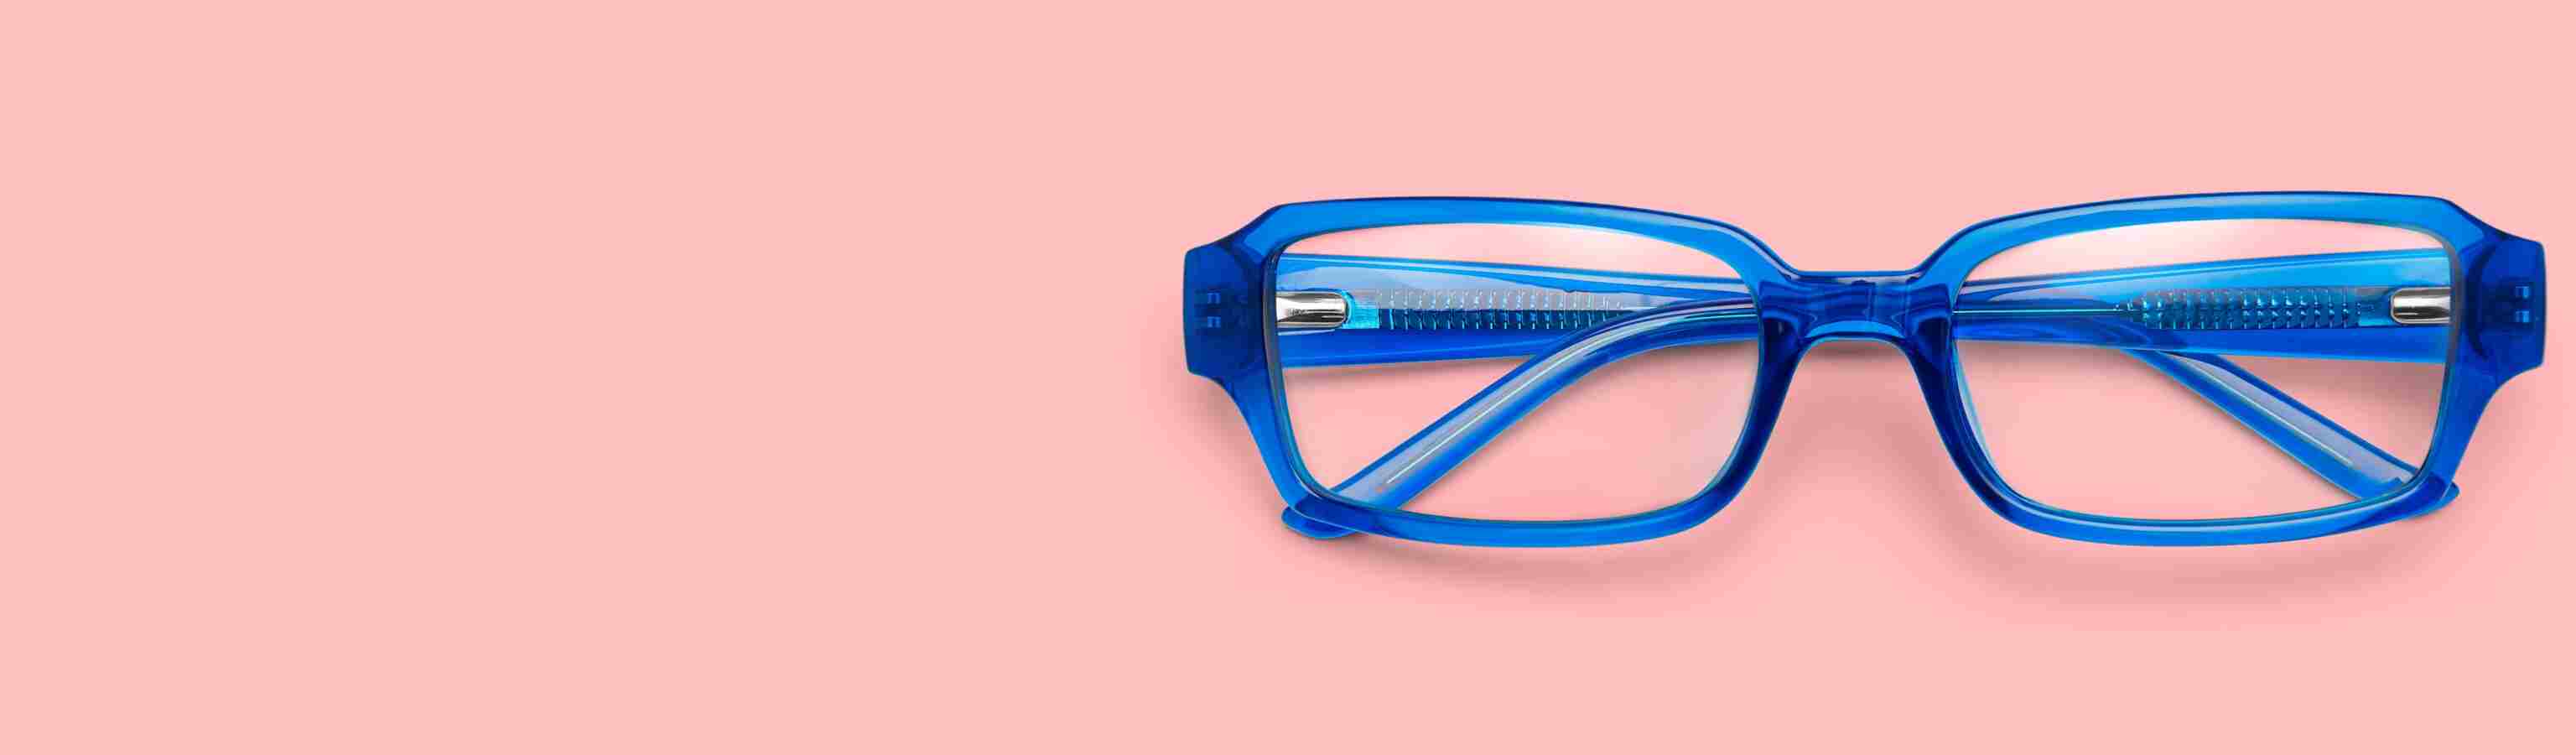 Blue Rectangle Glasses 2027416 with pink background.